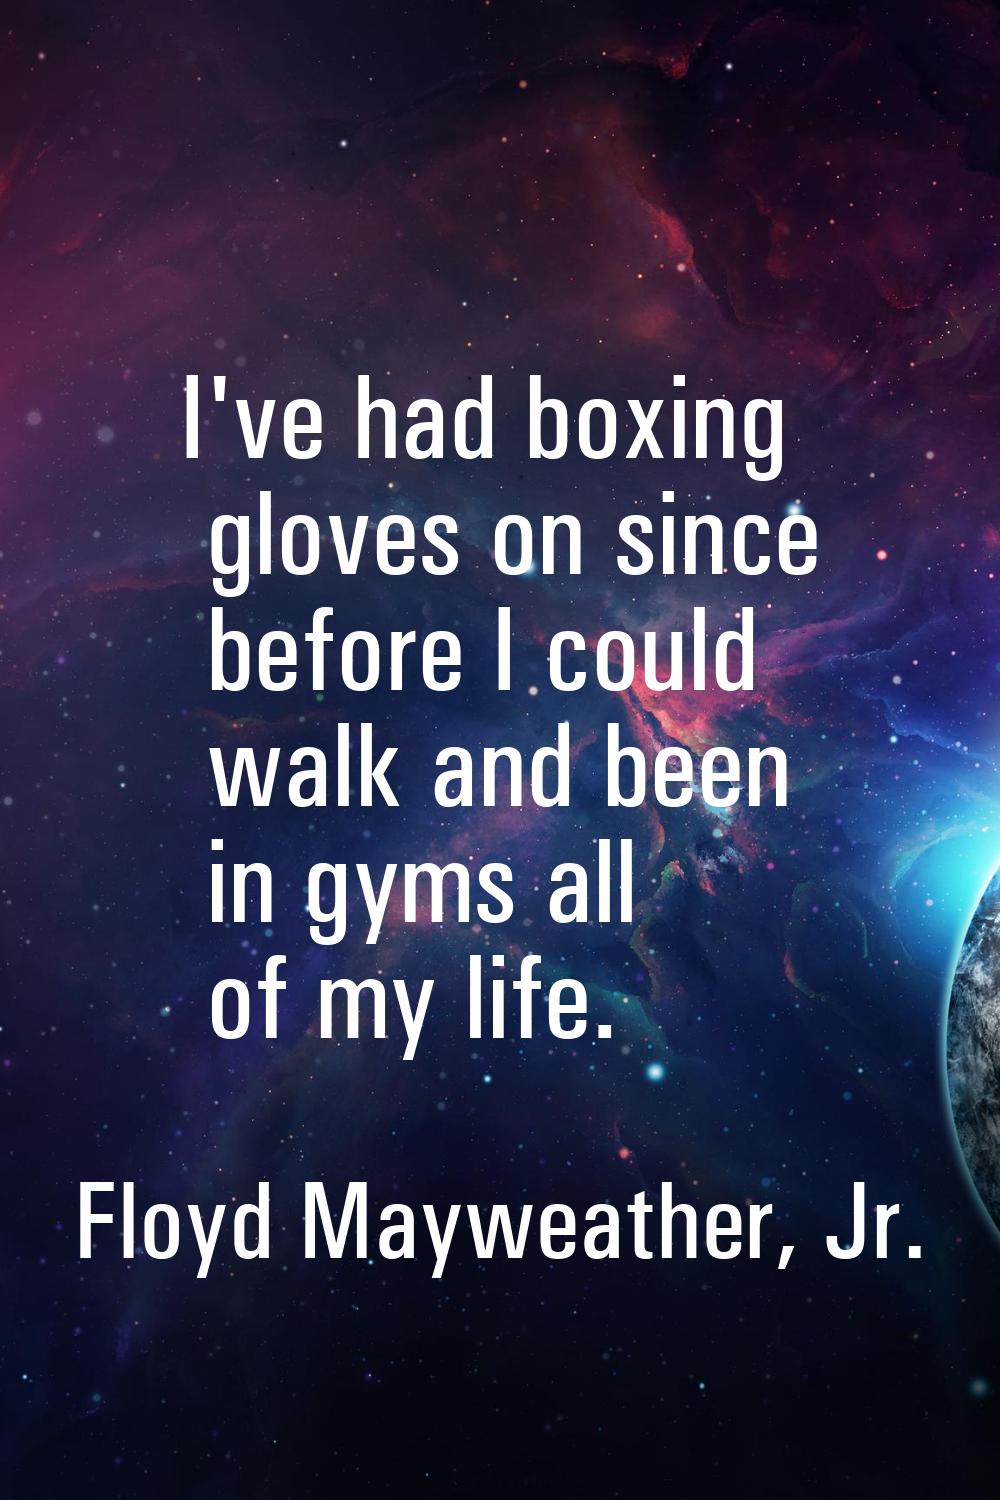 I've had boxing gloves on since before I could walk and been in gyms all of my life.